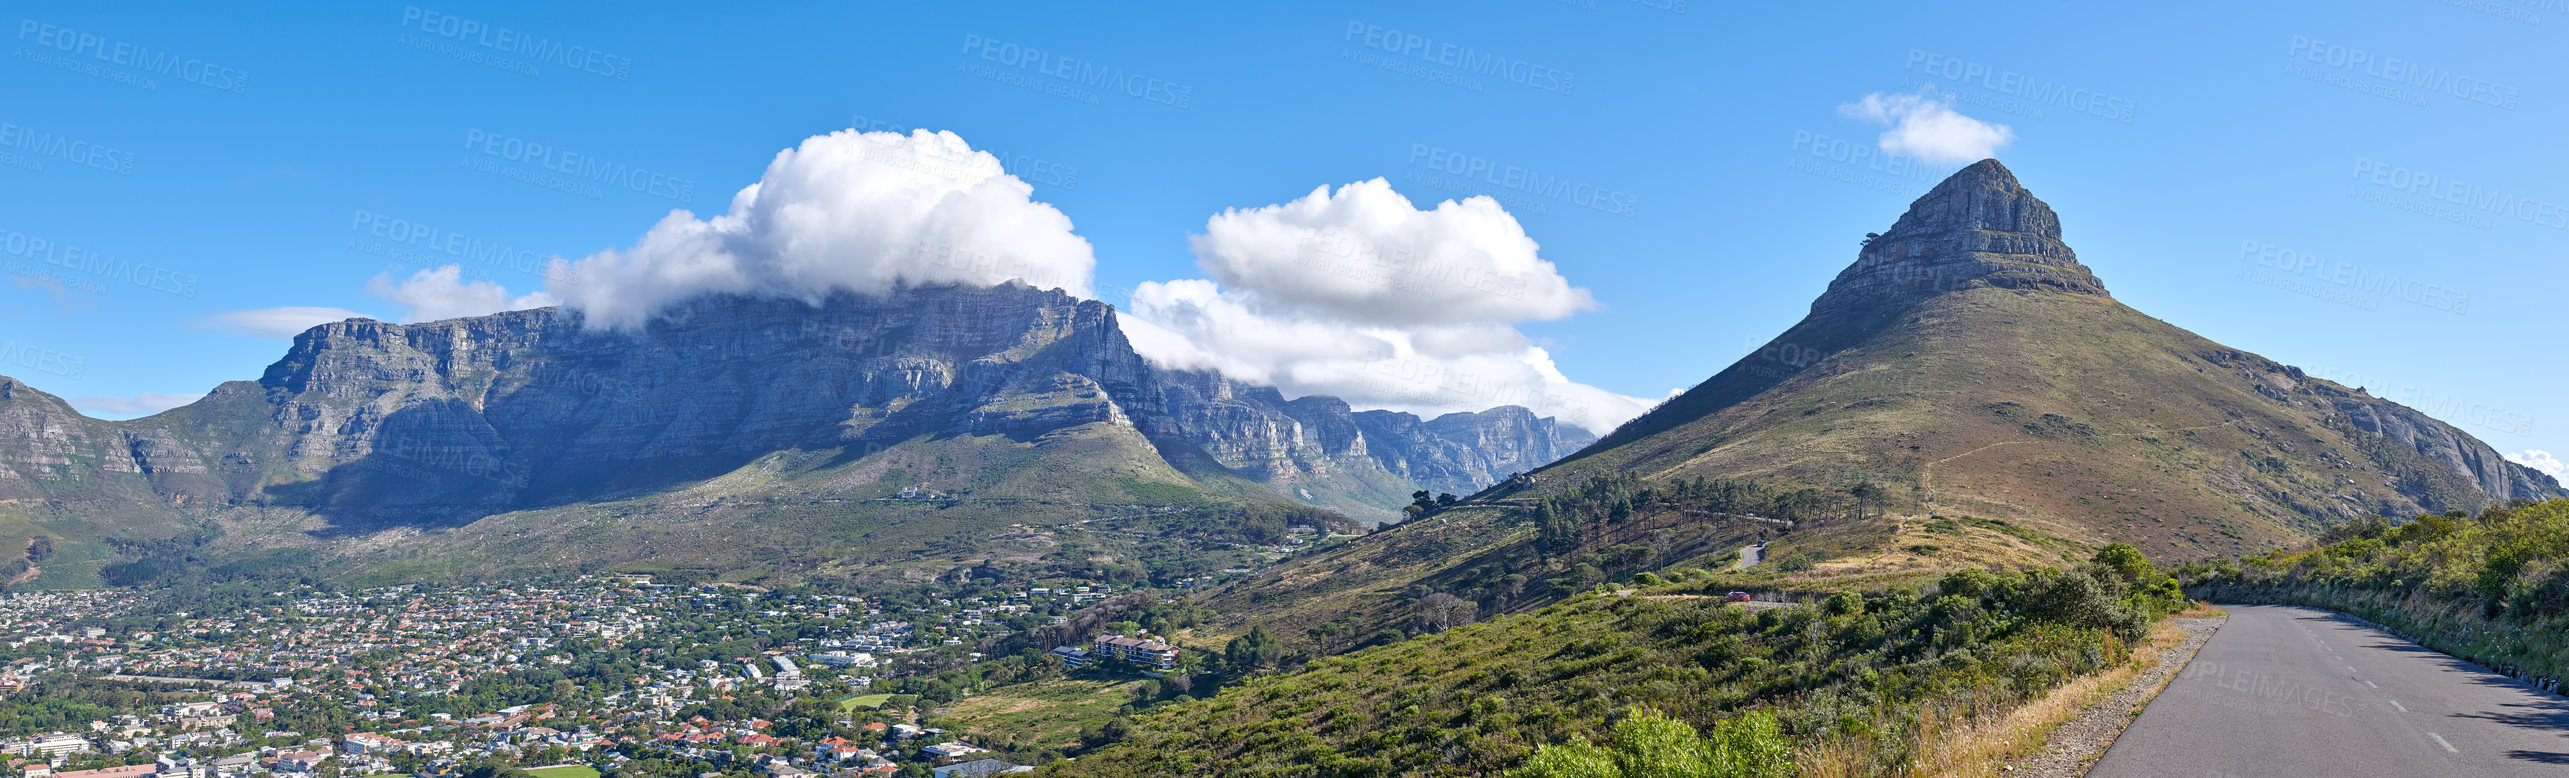 Buy stock photo Copyspace with a mountain pass along Lions Head and Table Mountain in Cape Town, South Africa against a cloudy sky background over a peninsula. calm, scenic landscape to travel explore on a road trip